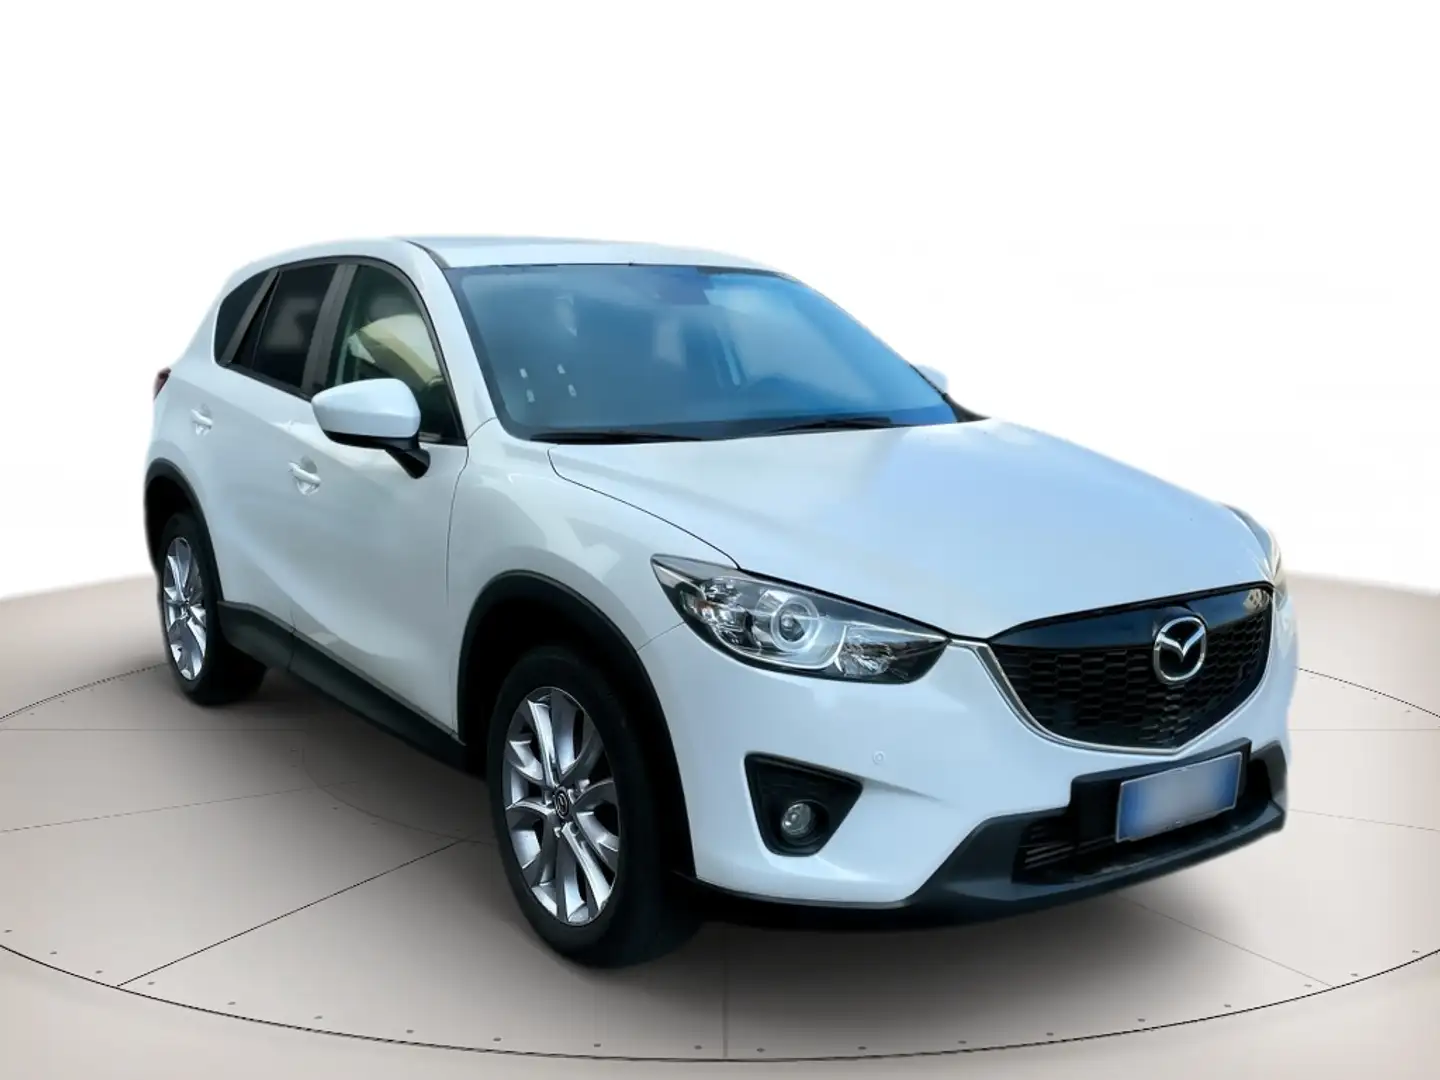 Mazda CX-5 I - CX-5 2.2 Exceed 4wd 150cv 6at Weiß - 1